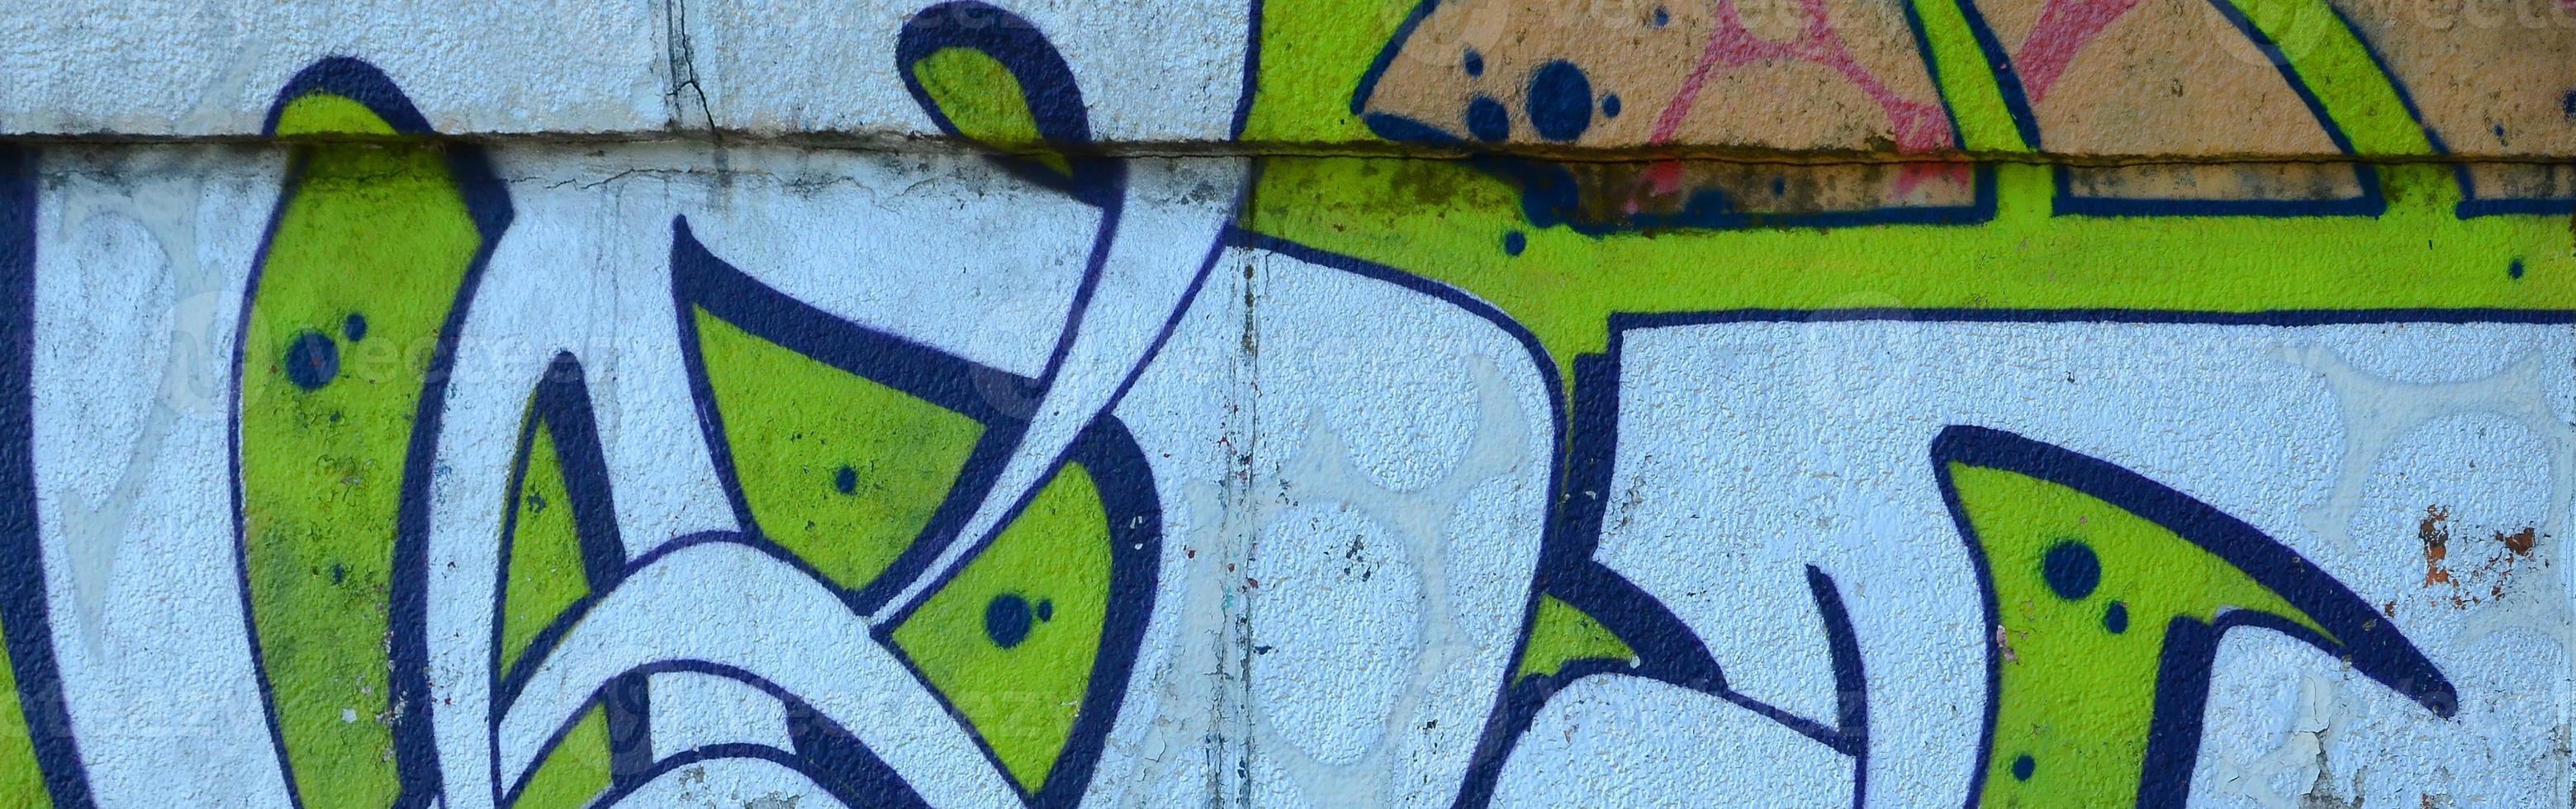 Fragment of graffiti drawings. The old wall decorated with paint stains in the style of street art culture. Colored background texture in green tones photo